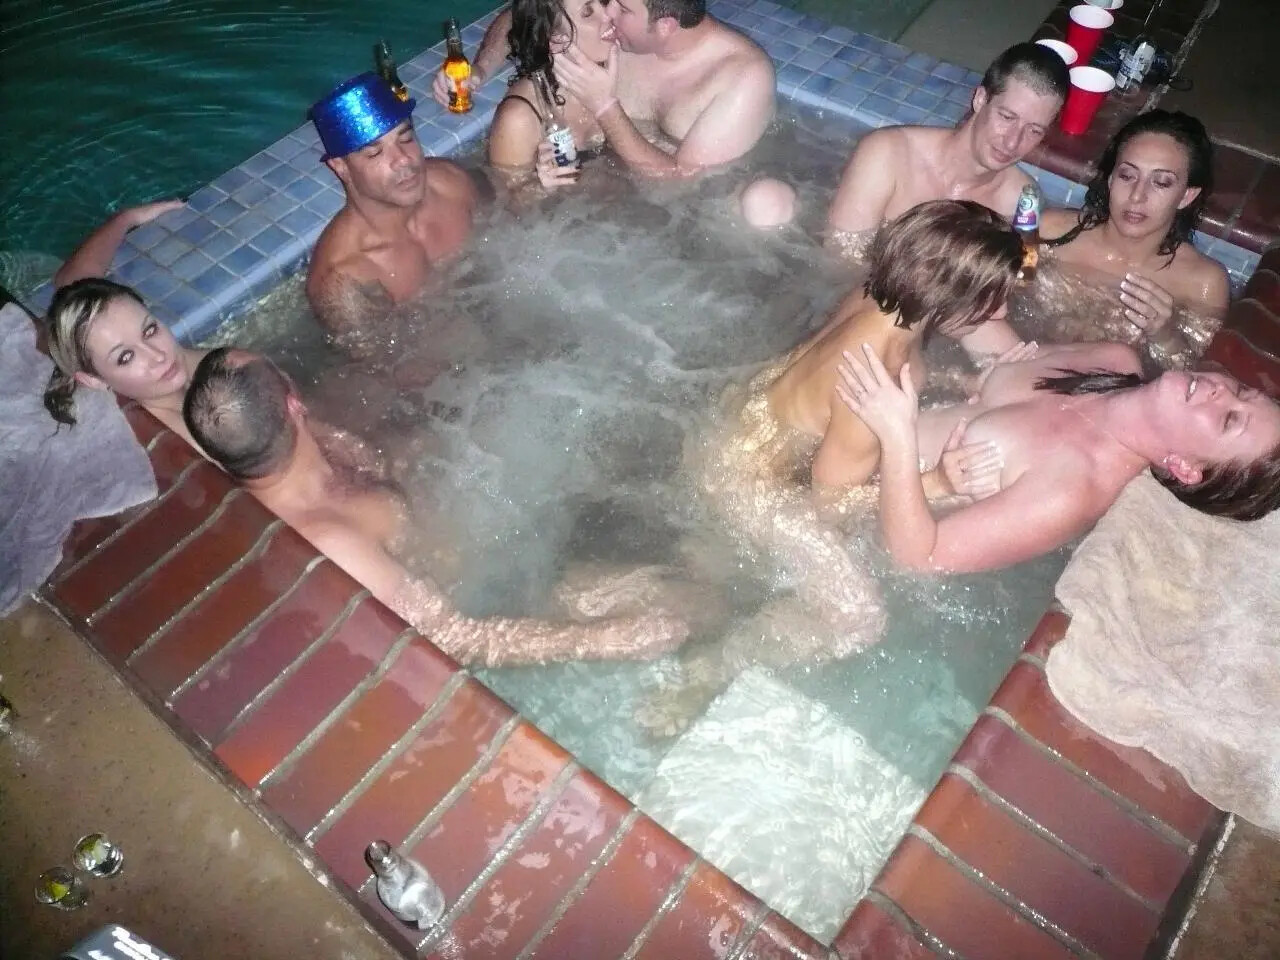 Our sex party? Ive got some pics! - 02-amateur-swinger-pics-from-the-hot-tub Porn photo